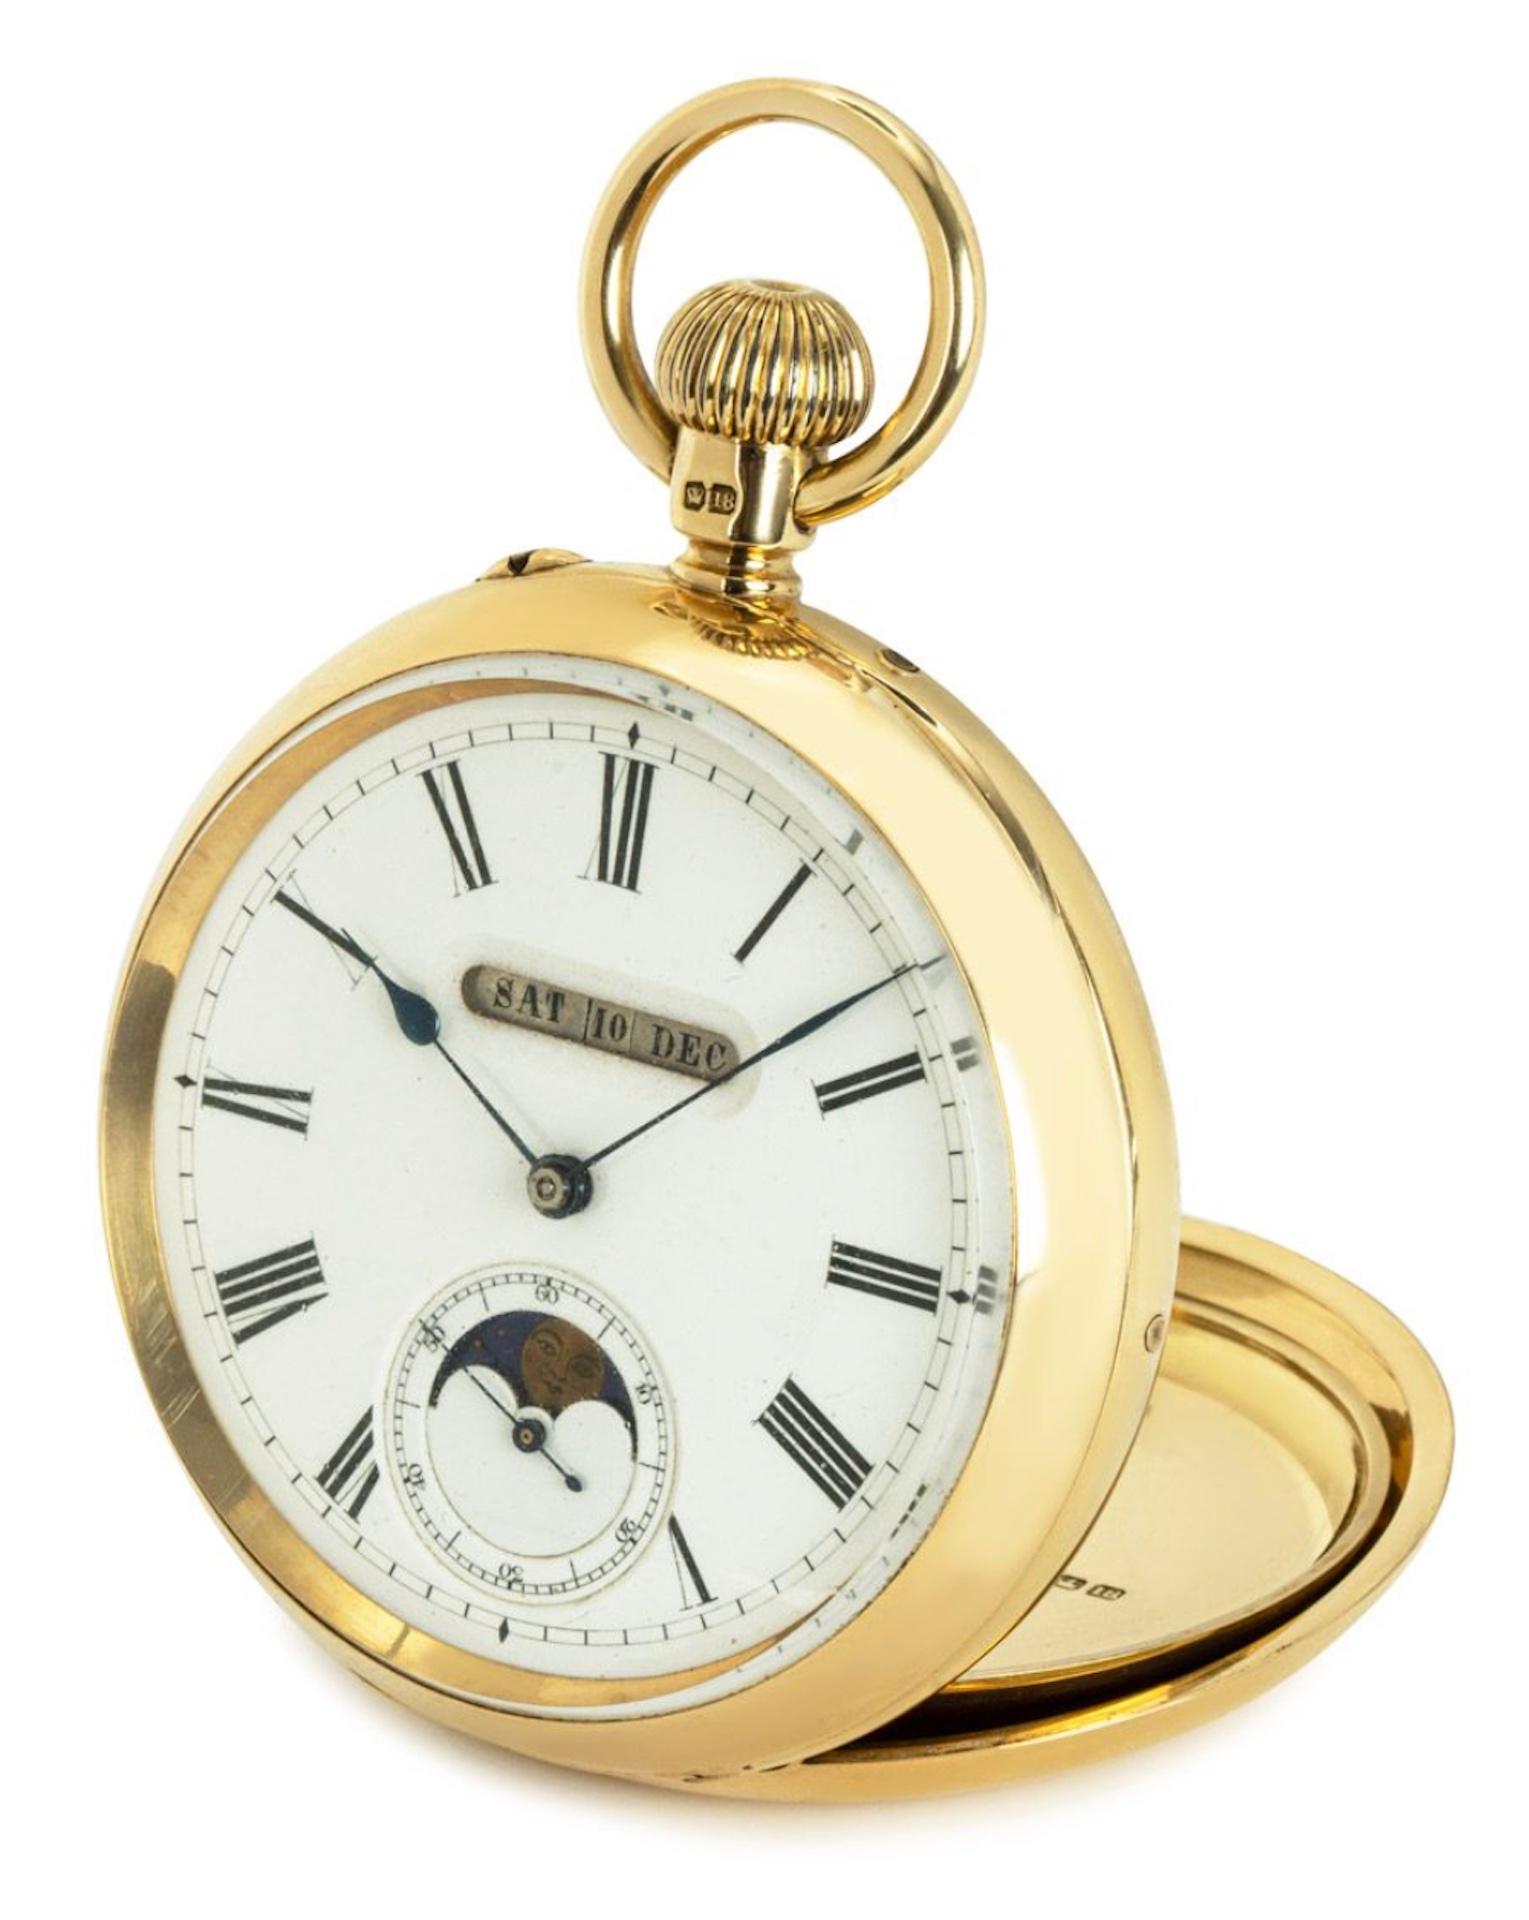 A Rare Digital Triple Calendar Moon Phase 18ct Yellow Gold Keyless Lever Open Face Pocket Watch C1880s.

Dial: The perfect white enamel dial Roman Numerals with outer minute track with digital apertures for the Day, Date, Month and moon phase. blued